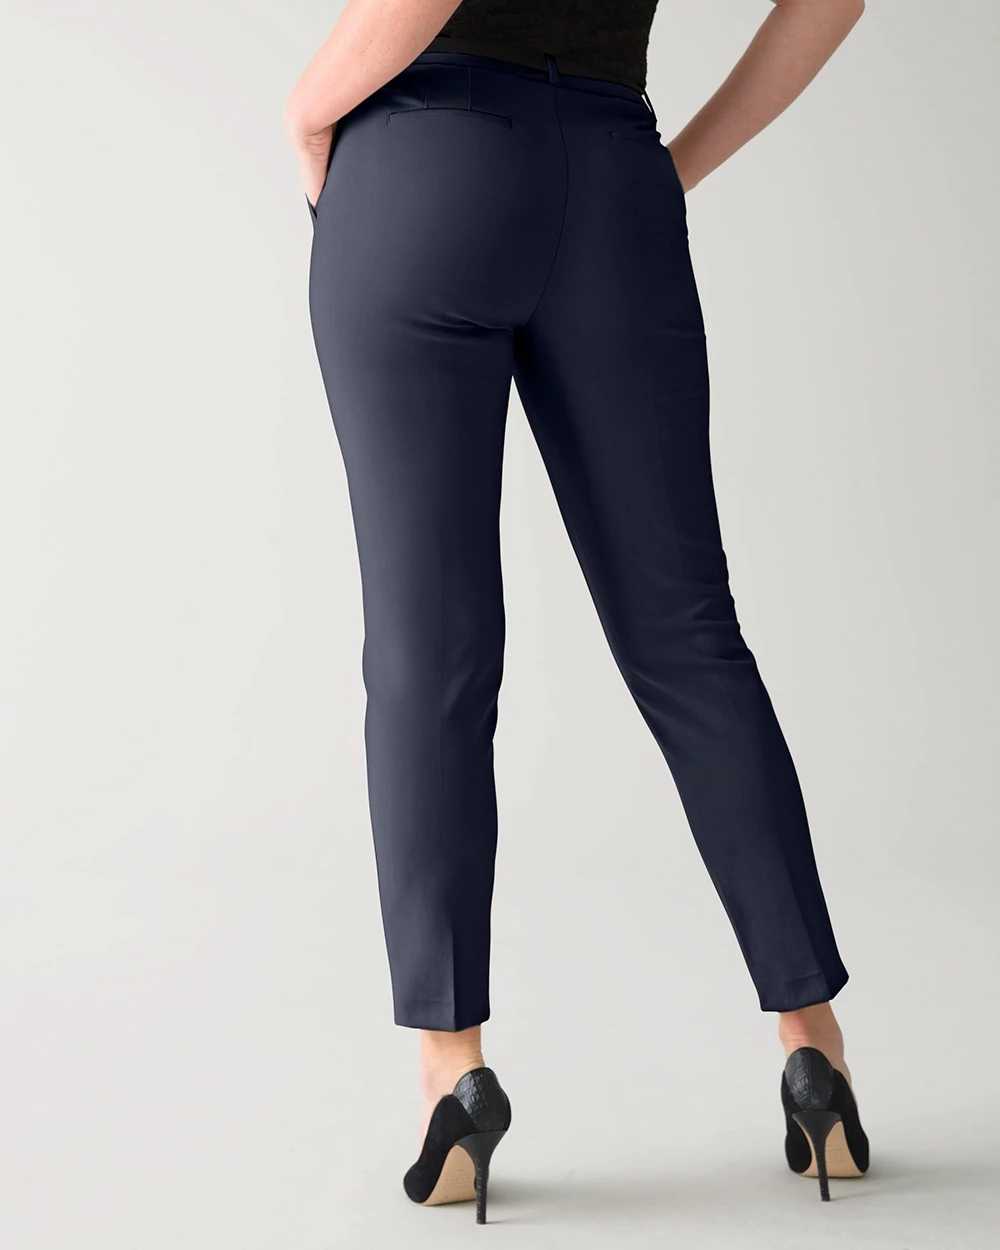 Curvy-Fit Comfort Stretch Slim Ankle Pants click to view larger image.